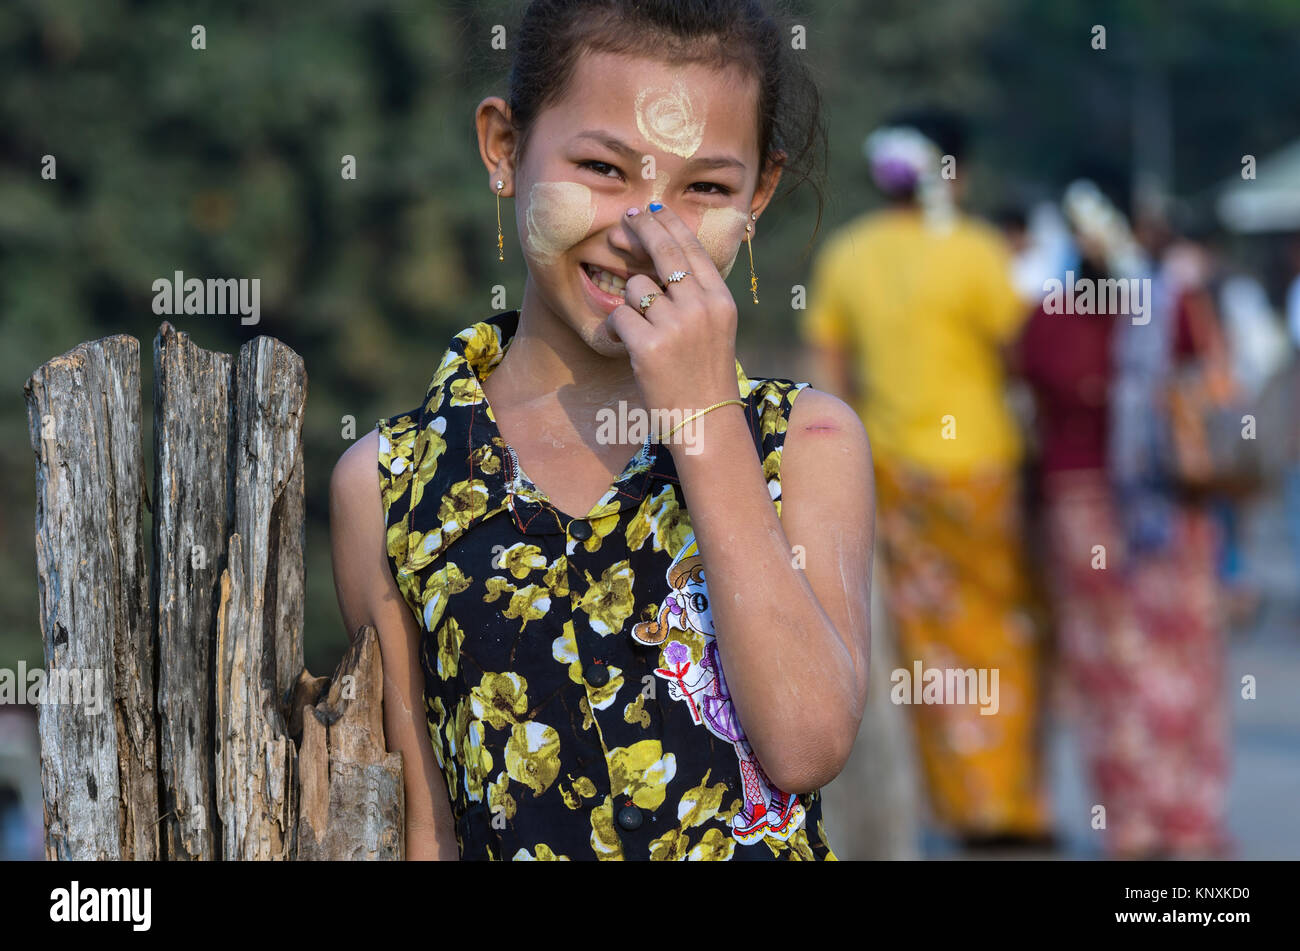 MANDALAY, MYANMAR - MARCH 13 : Unidentified Burmese girl smiling at the ubein bridge on March 13, 2016 in Mandalay, Myanmar. The U-Bein bridge is the  Stock Photo